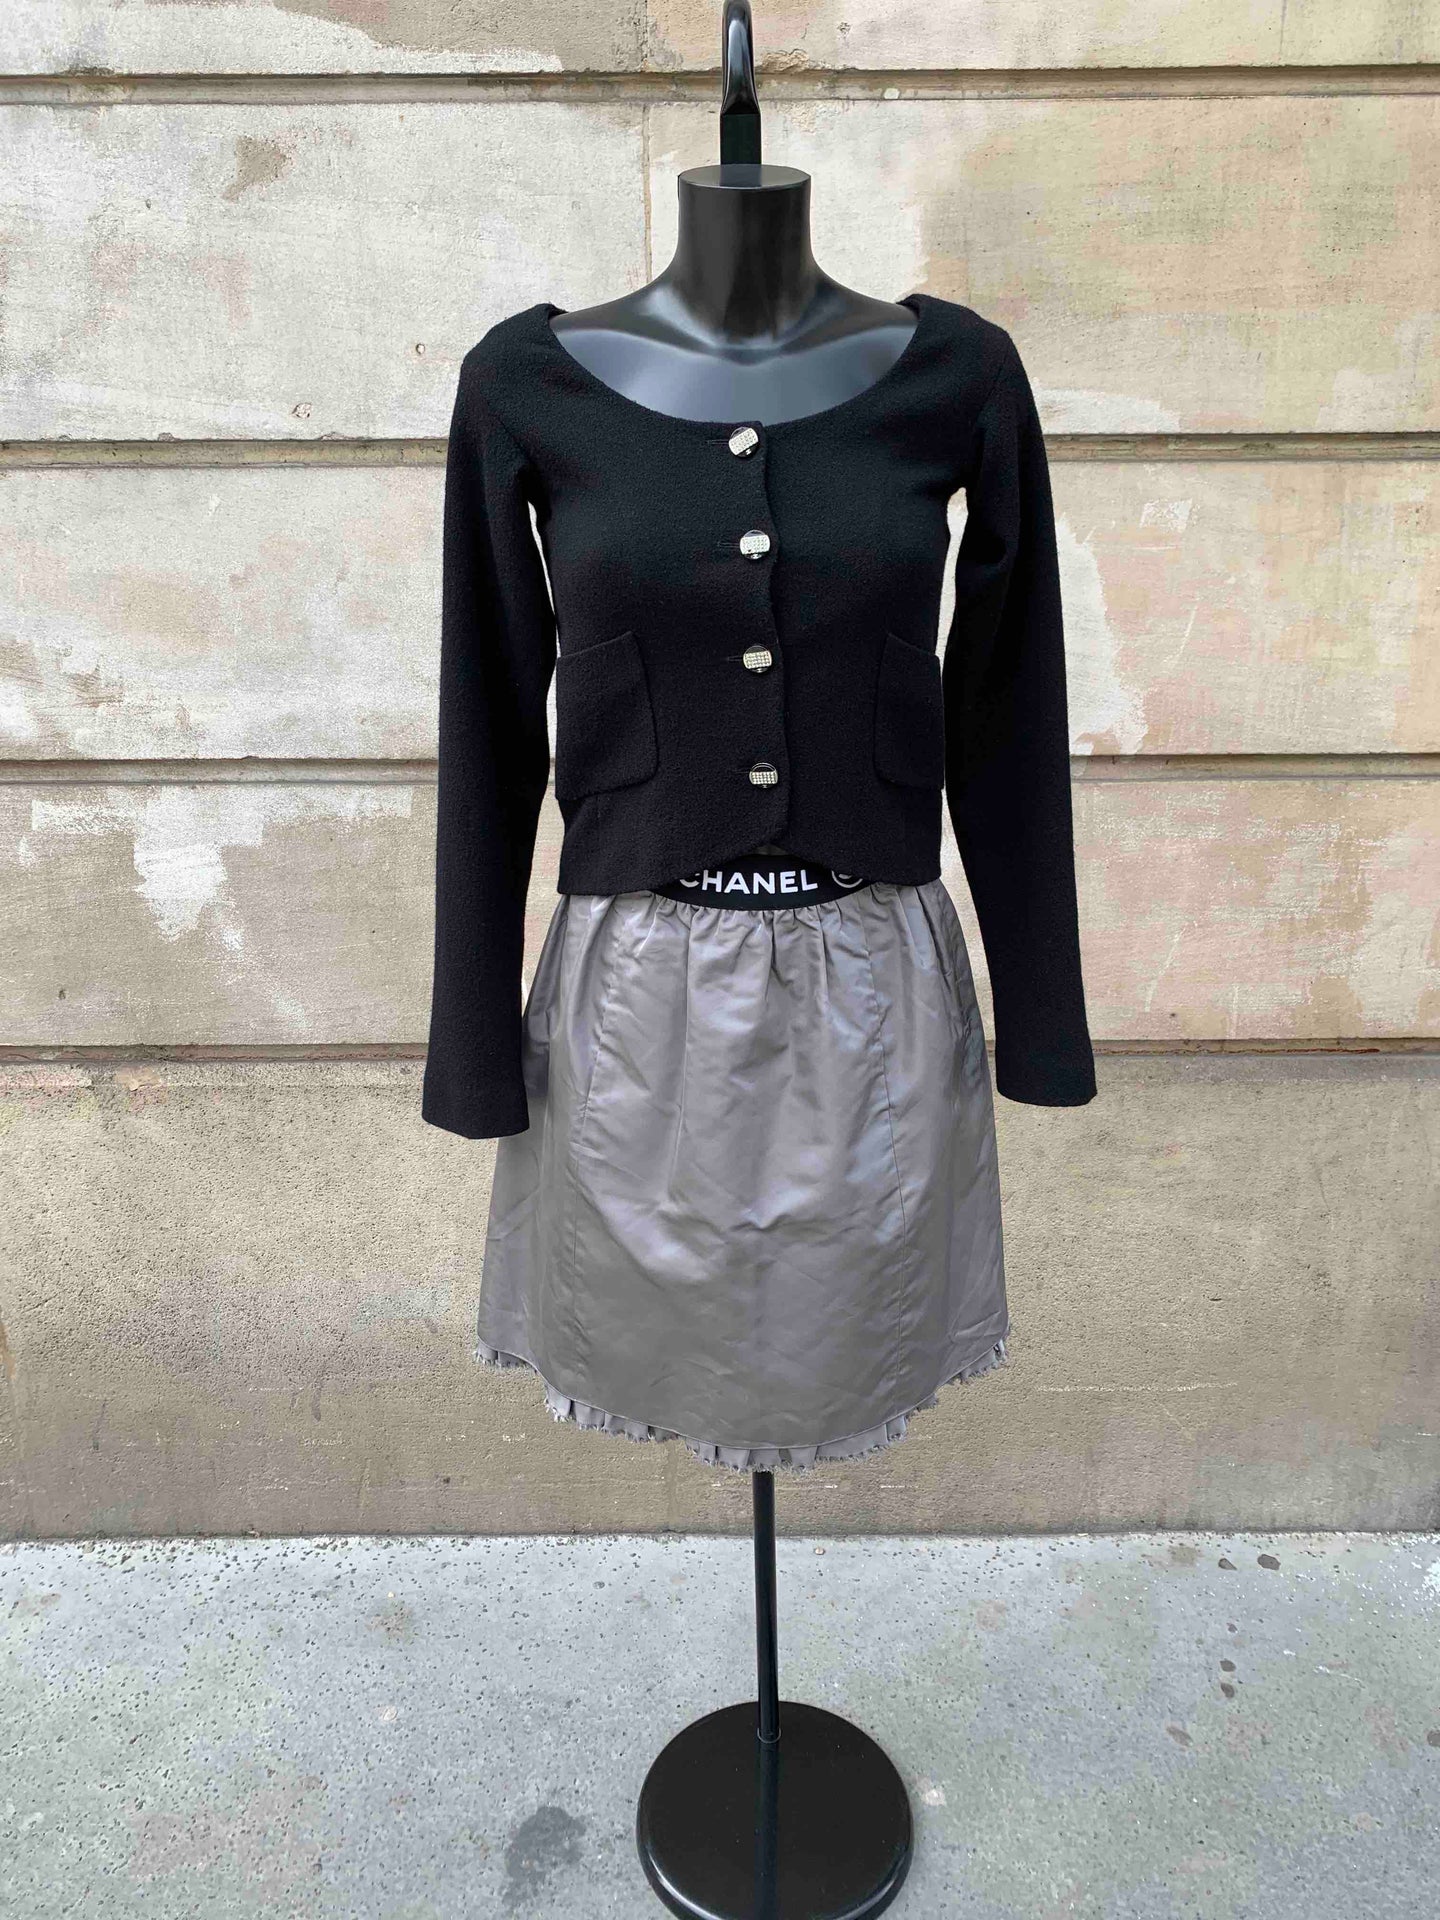 black cropped chanel jacket in black with rhinestones buttons good condition